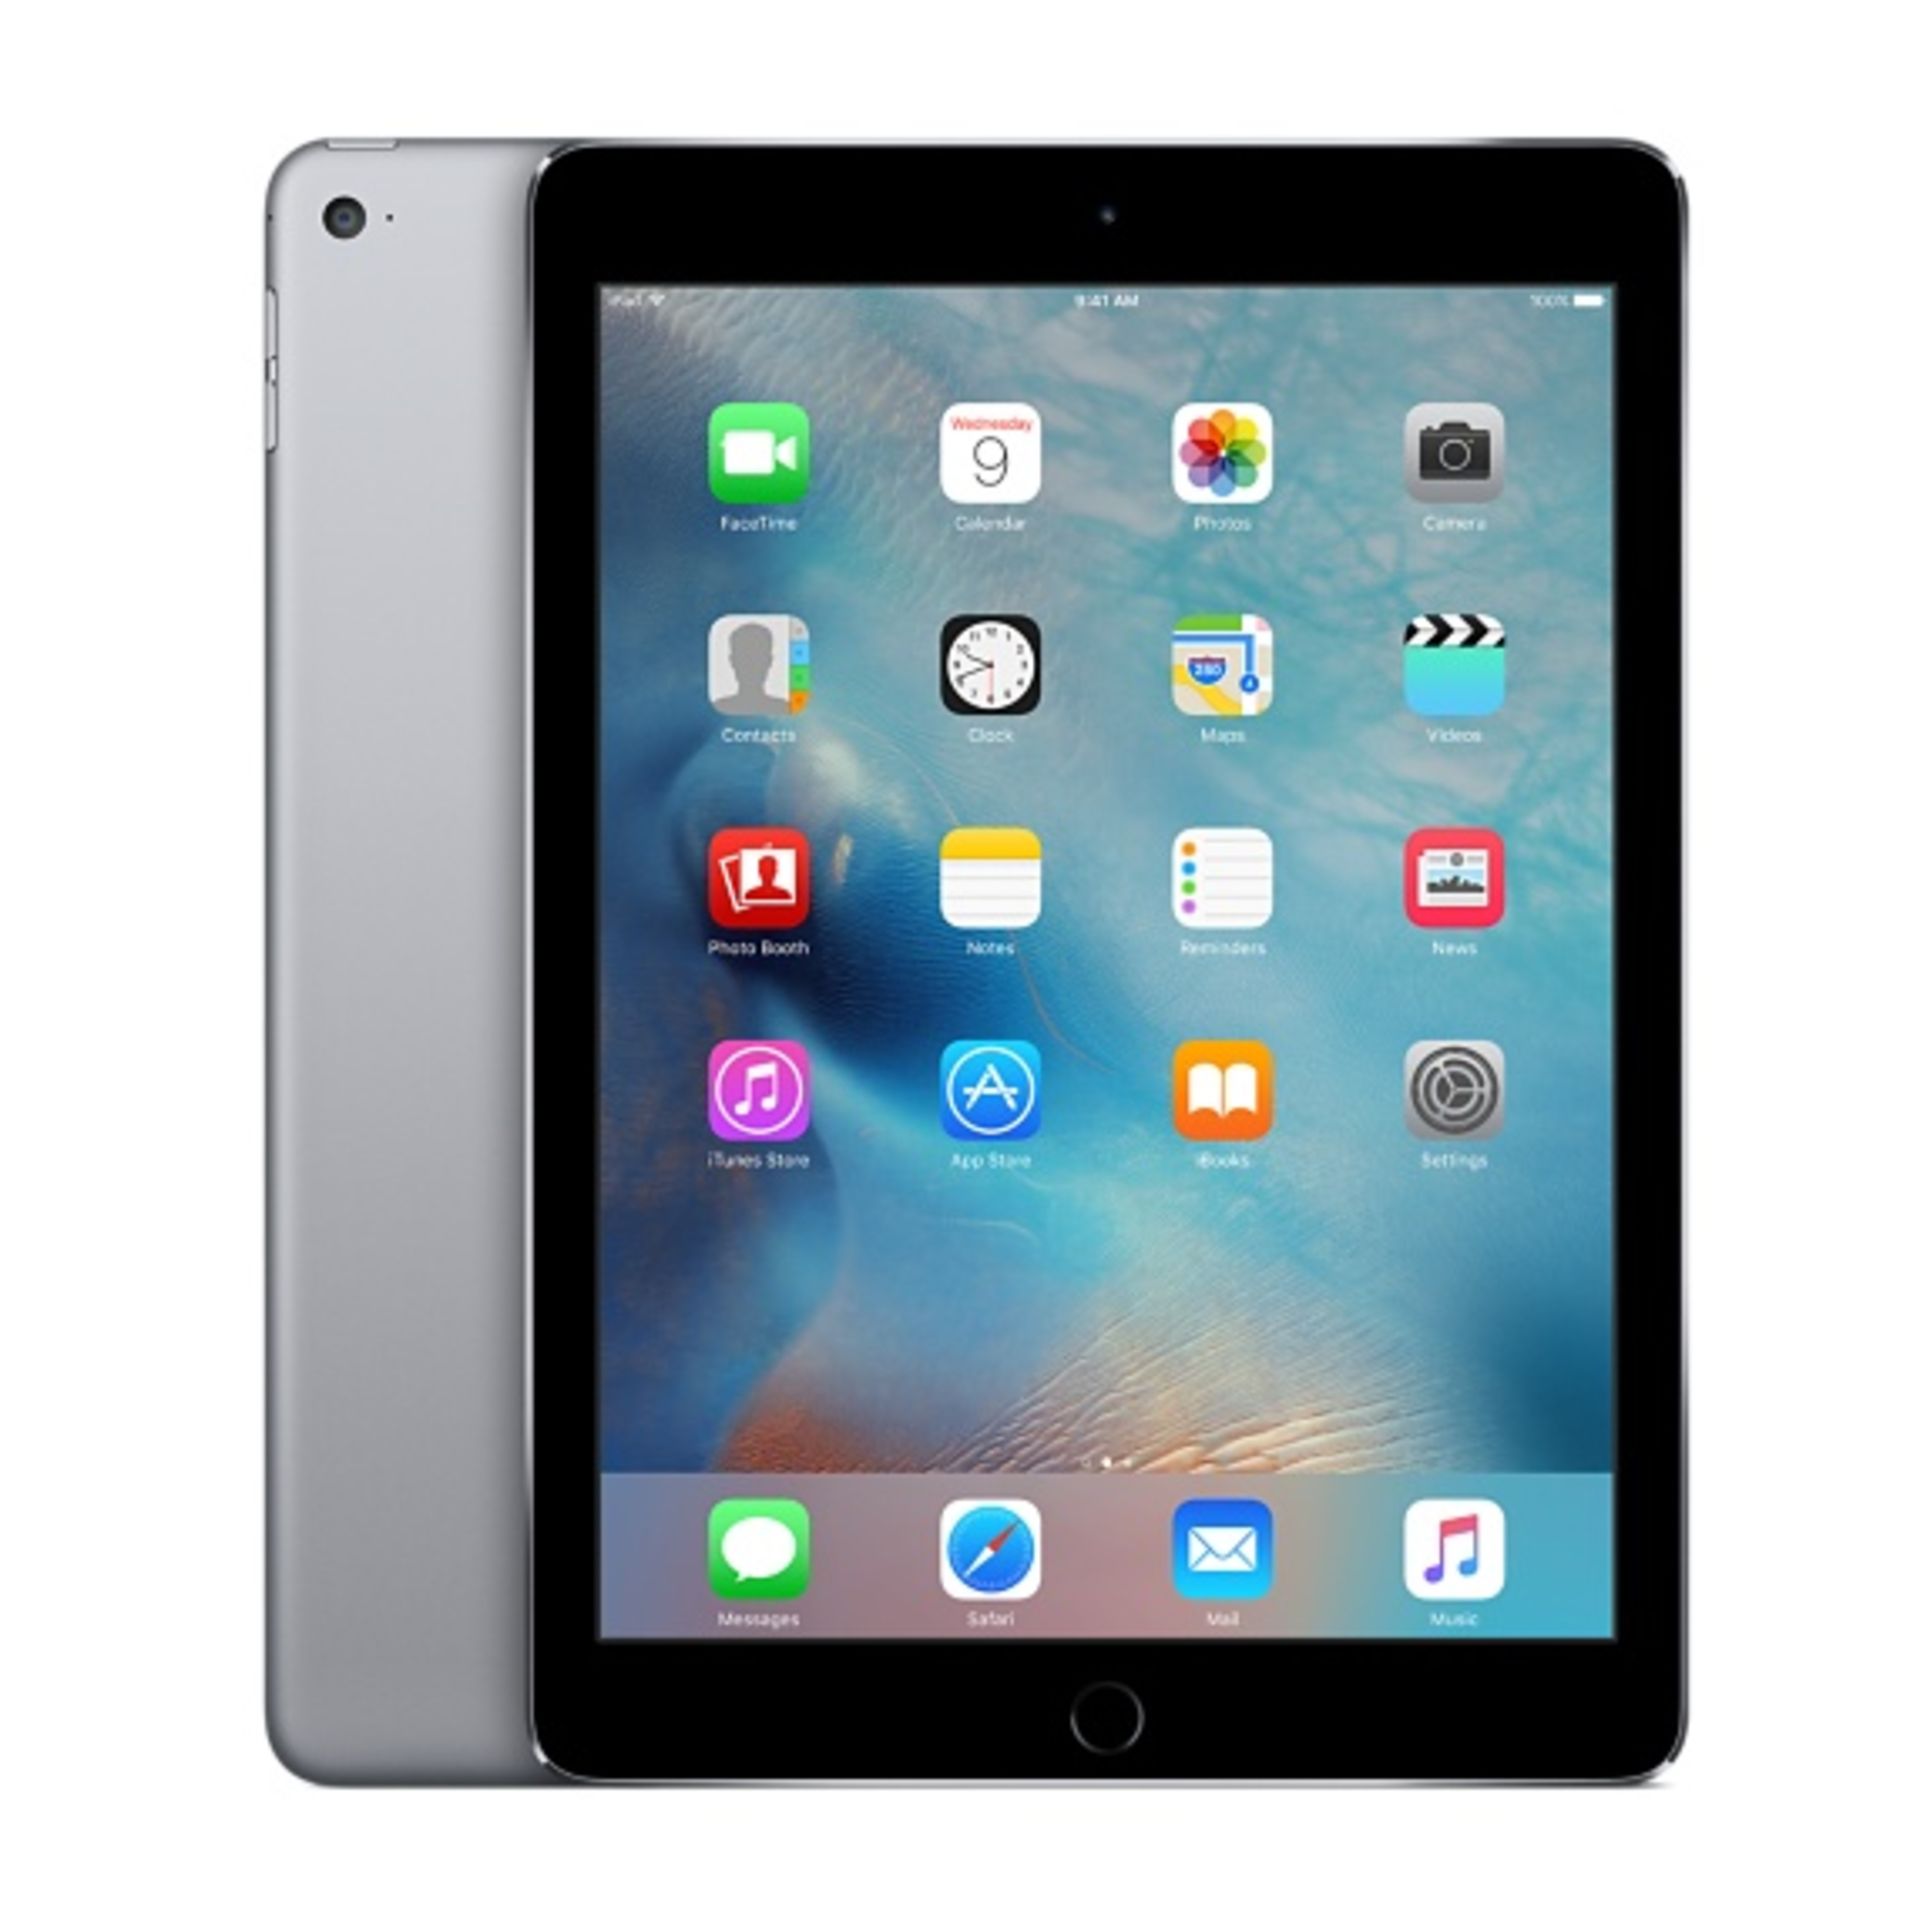 V Grade A Apple iPad Air 2 32GB Space Grey - Wi-Fi - In Generic Box - With Apple Accessories X 2